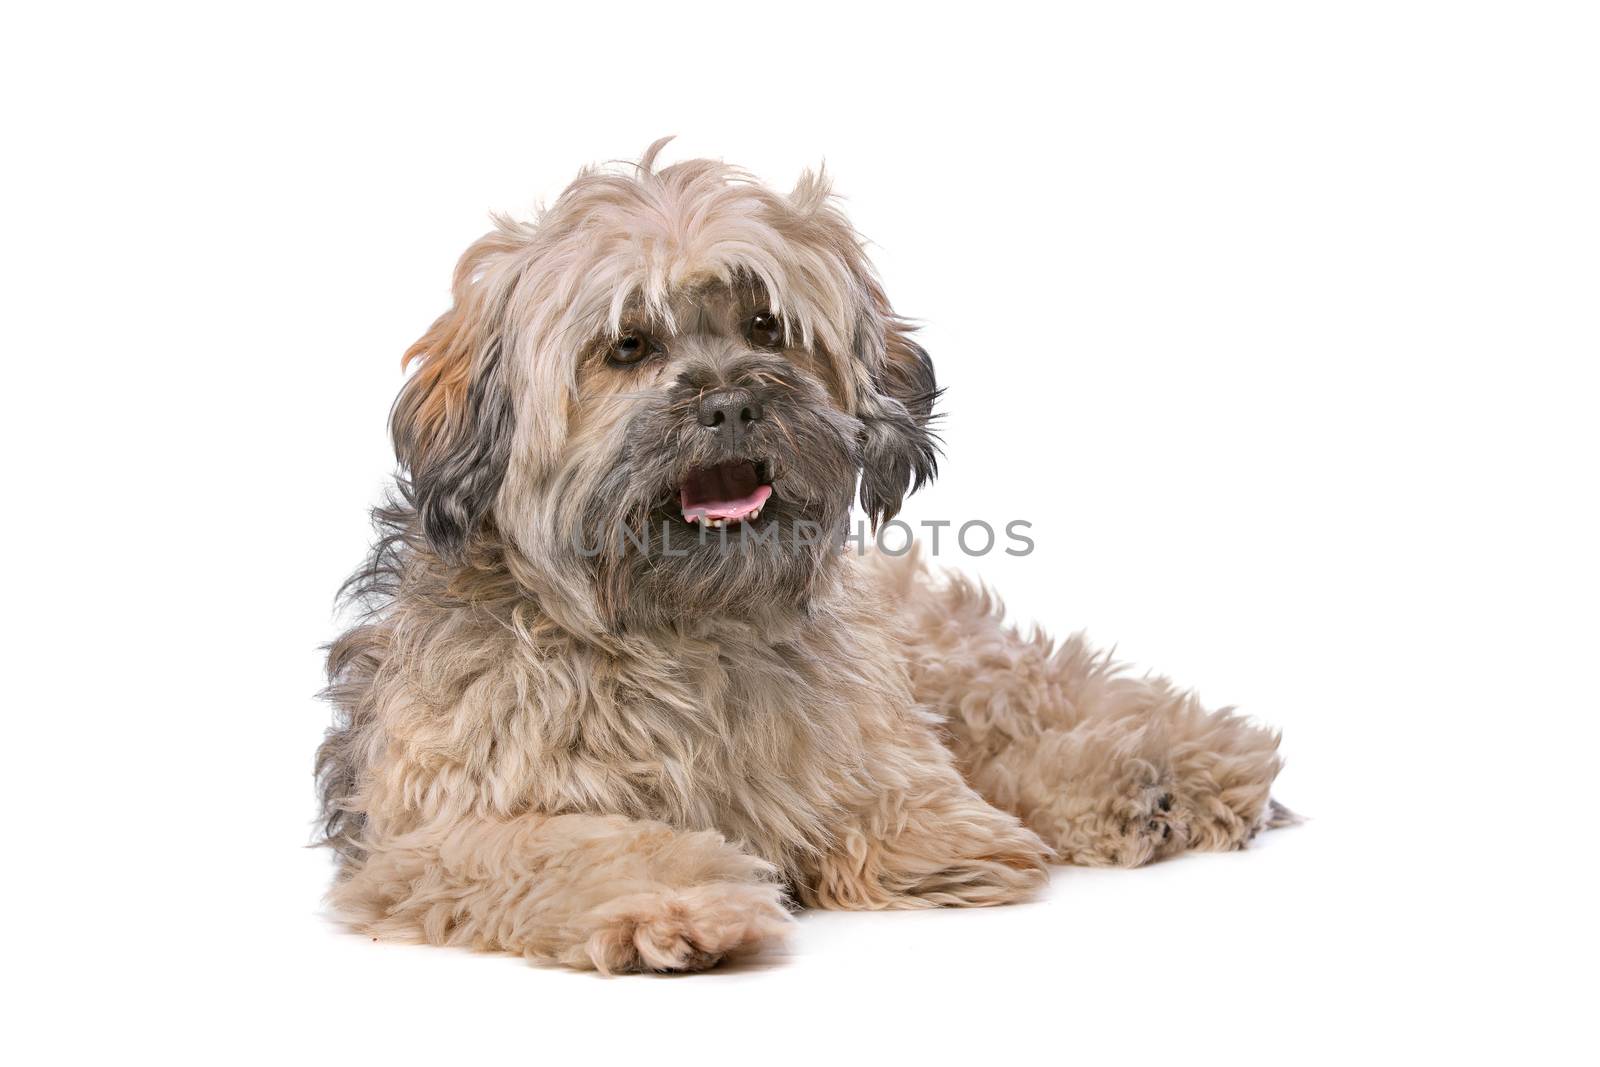 Mixed breed small fluffy dog by eriklam